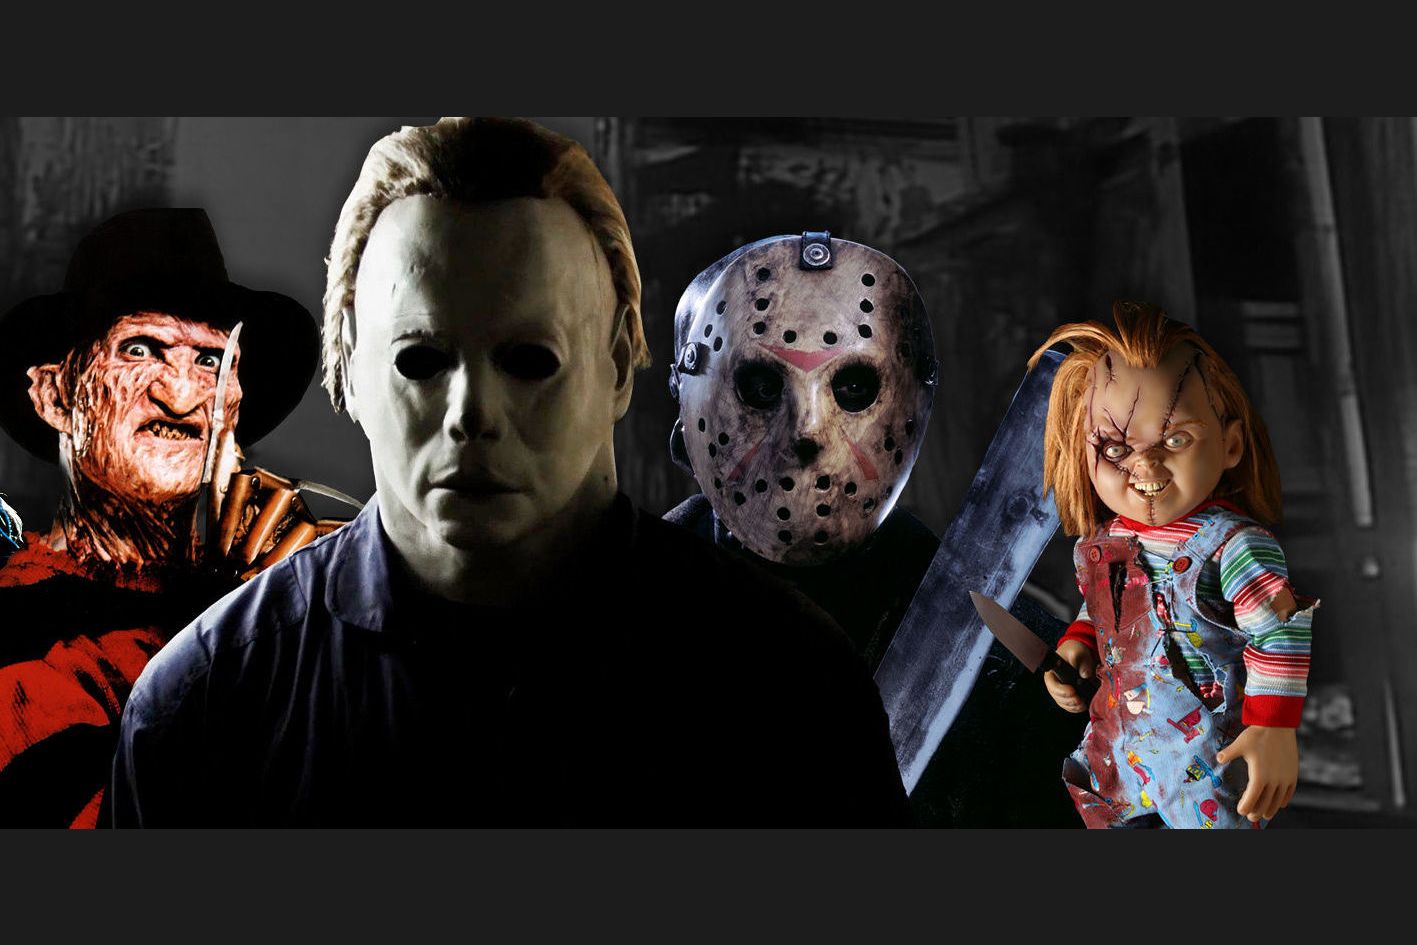 Who's Your Favorite Horror Movie Character